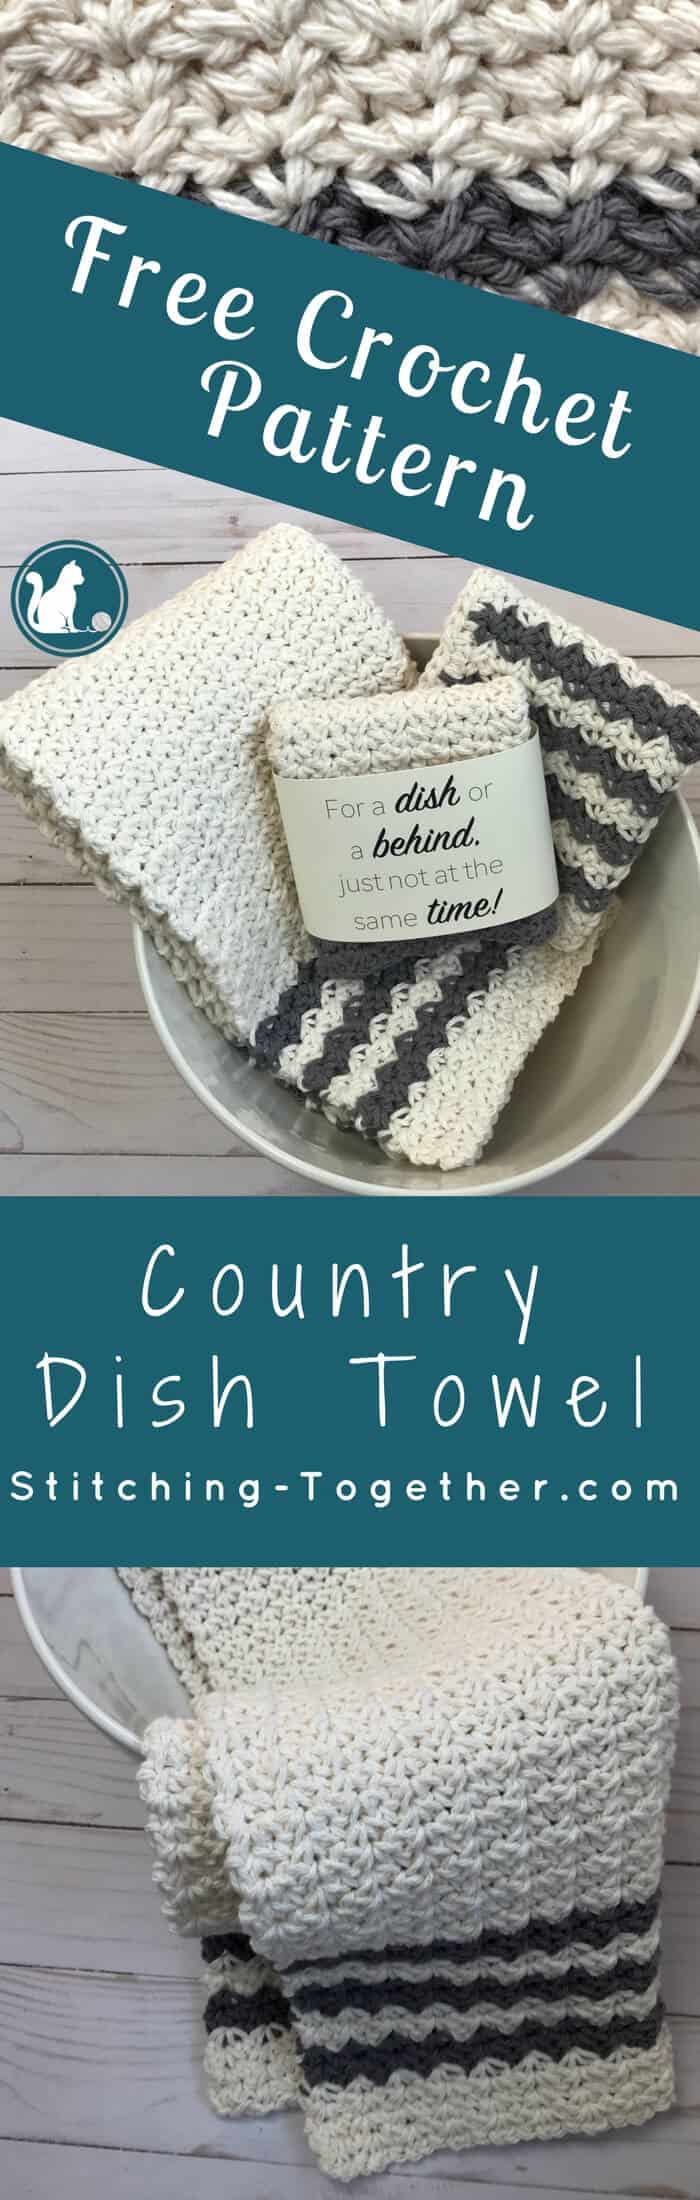 https://www.stitching-together.com/wp-content/uploads/2018/03/Crochet-Country-Dish-Towel-Pin.jpg